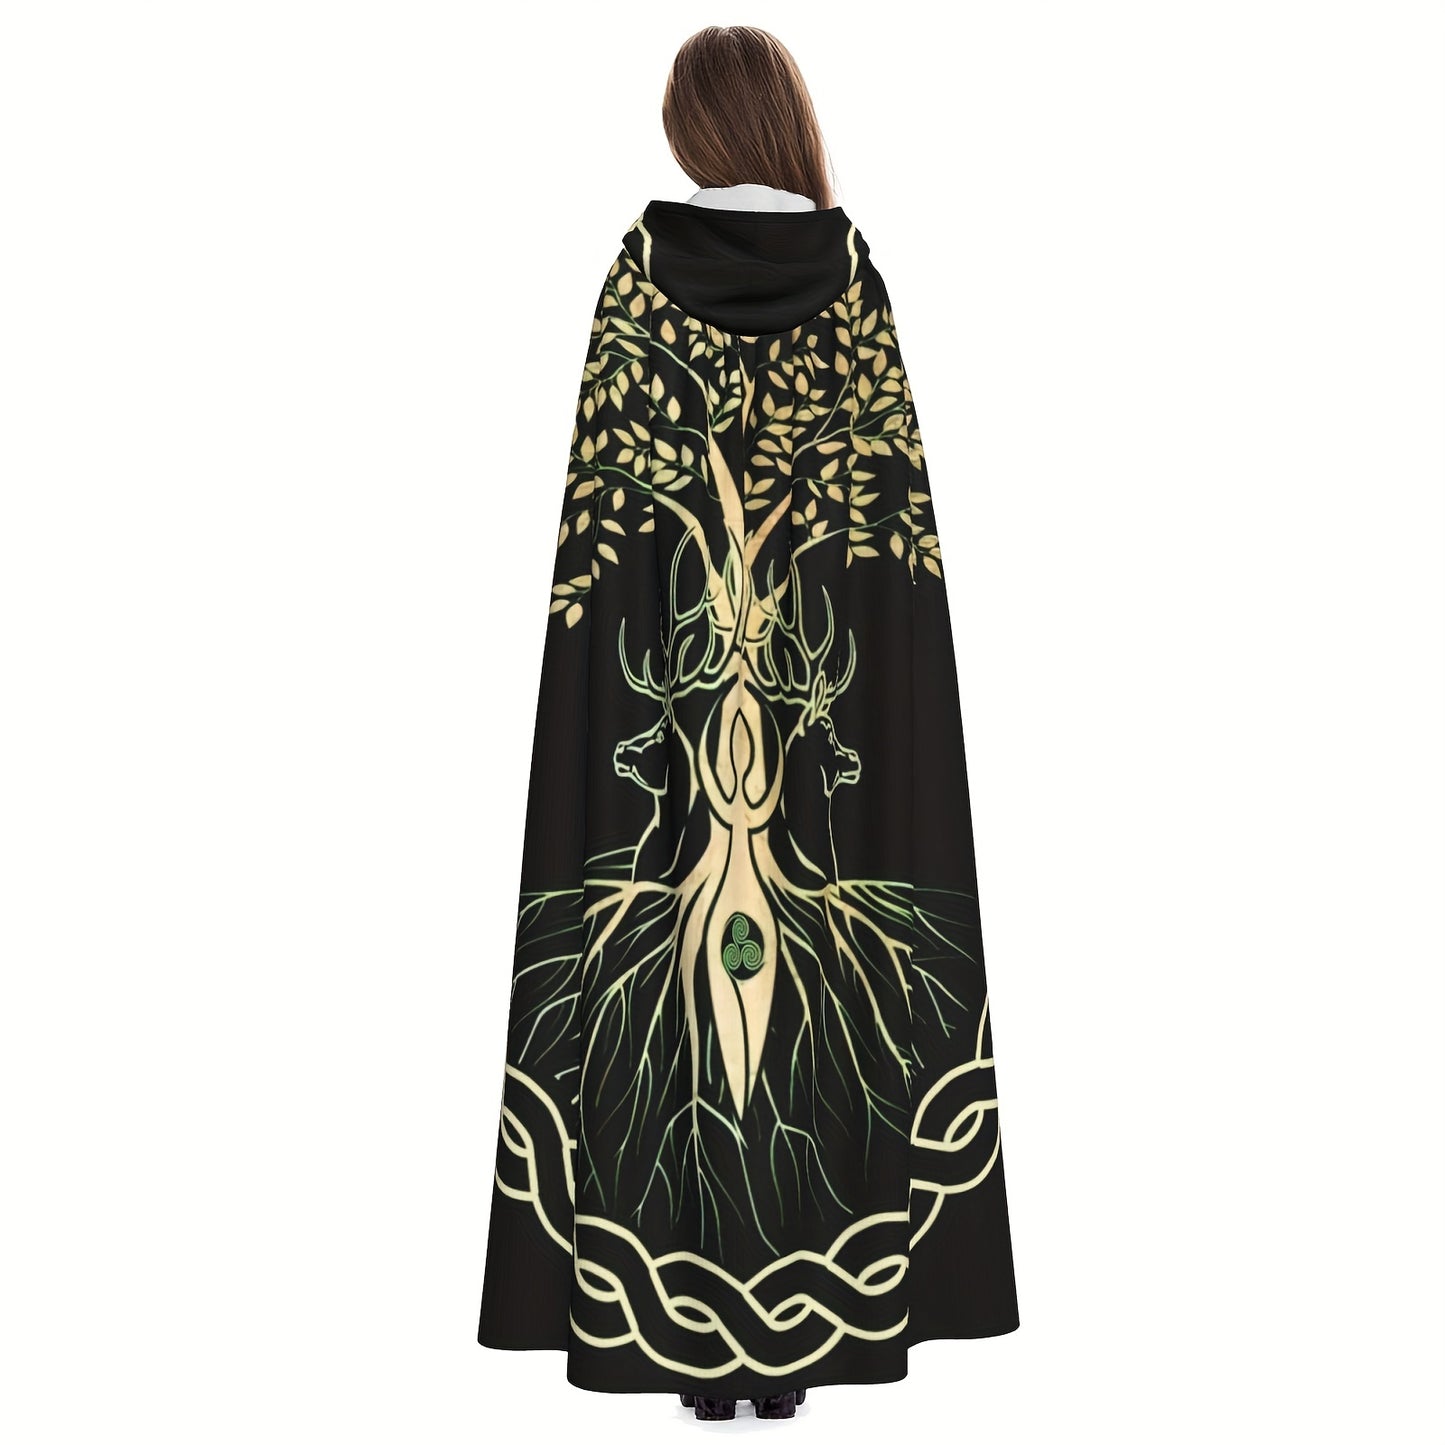 Person wearing a Maramalive™ 1pc, Nordic Style Viking Goddess Wiccan Wicca Halloween Wizard Witch Hooded Robe Cloak Christmas Hoodies Cape Cosplay For Adult Men Women Party Favors Supplies Dresses Clothes Gifts Costume adorned with a stylized tree design featuring branches, leaves, roots, and intricate patterns, viewed from behind.